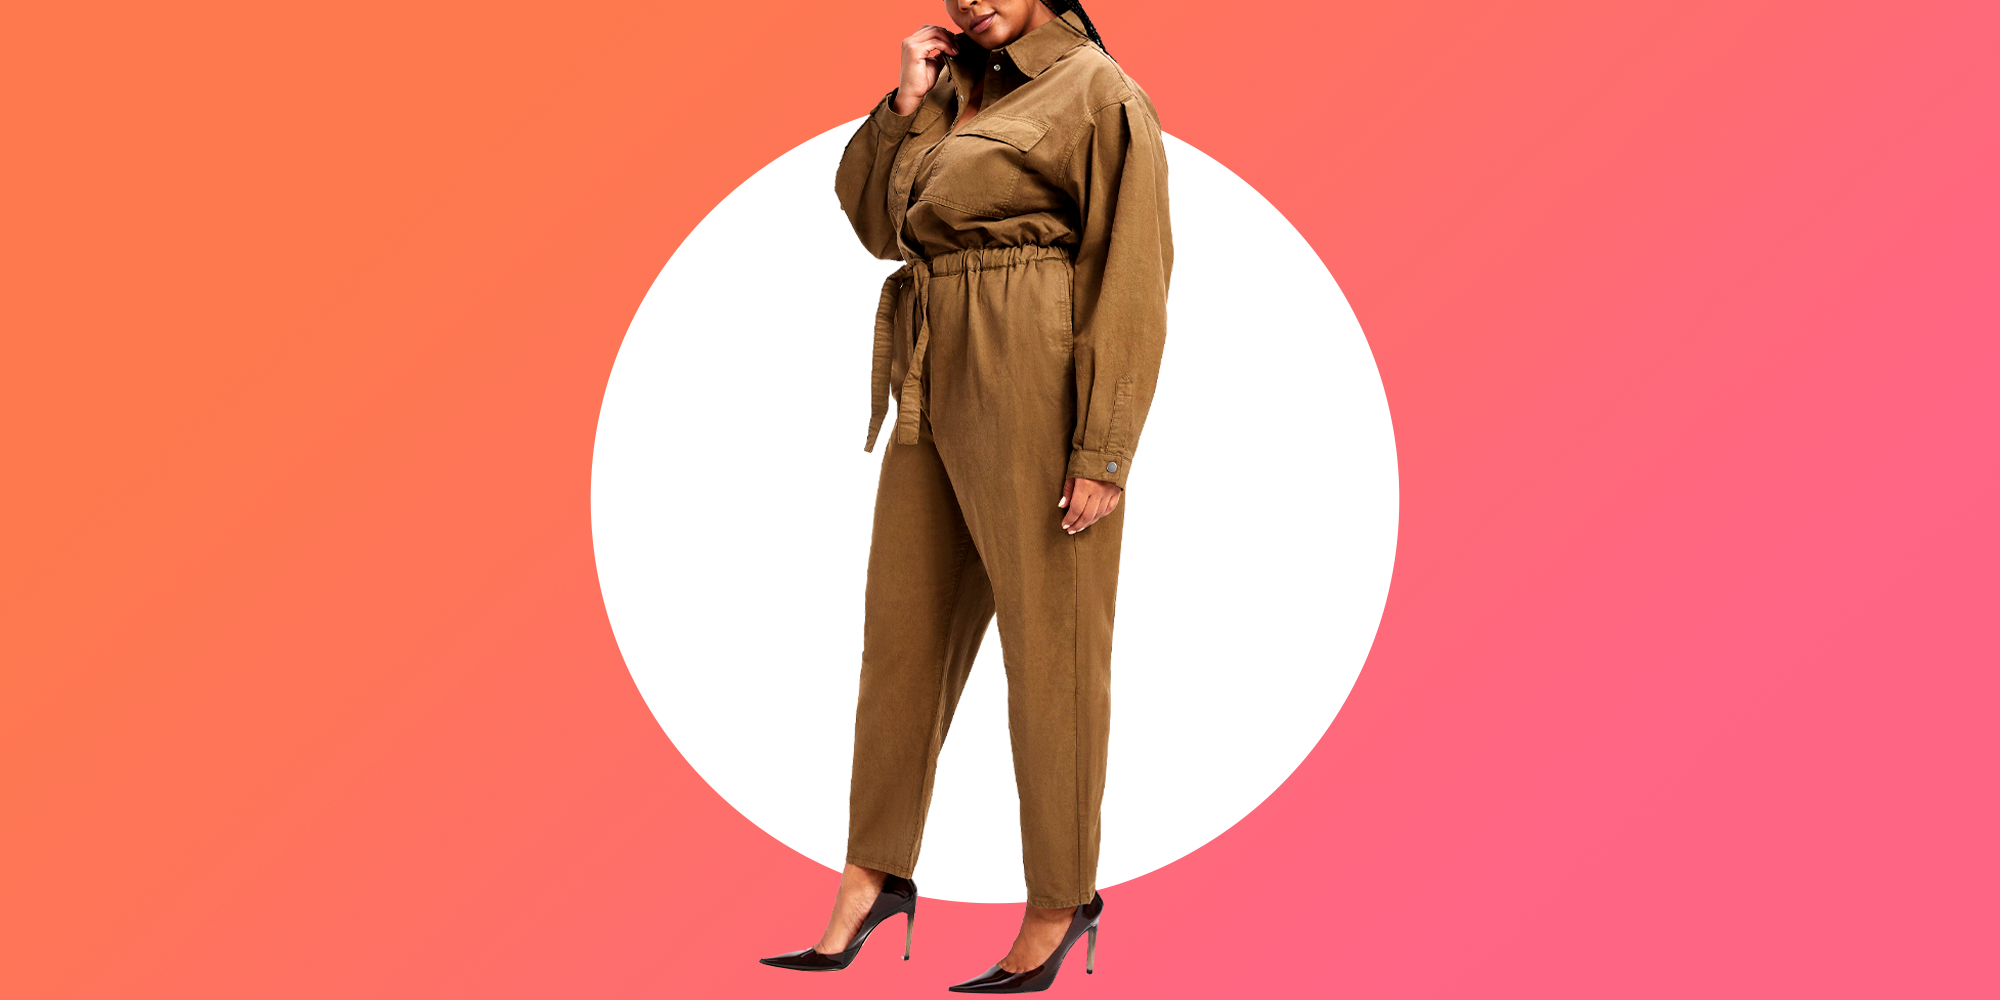 How to Wear a Jumpsuit After 40 If You are Plus size